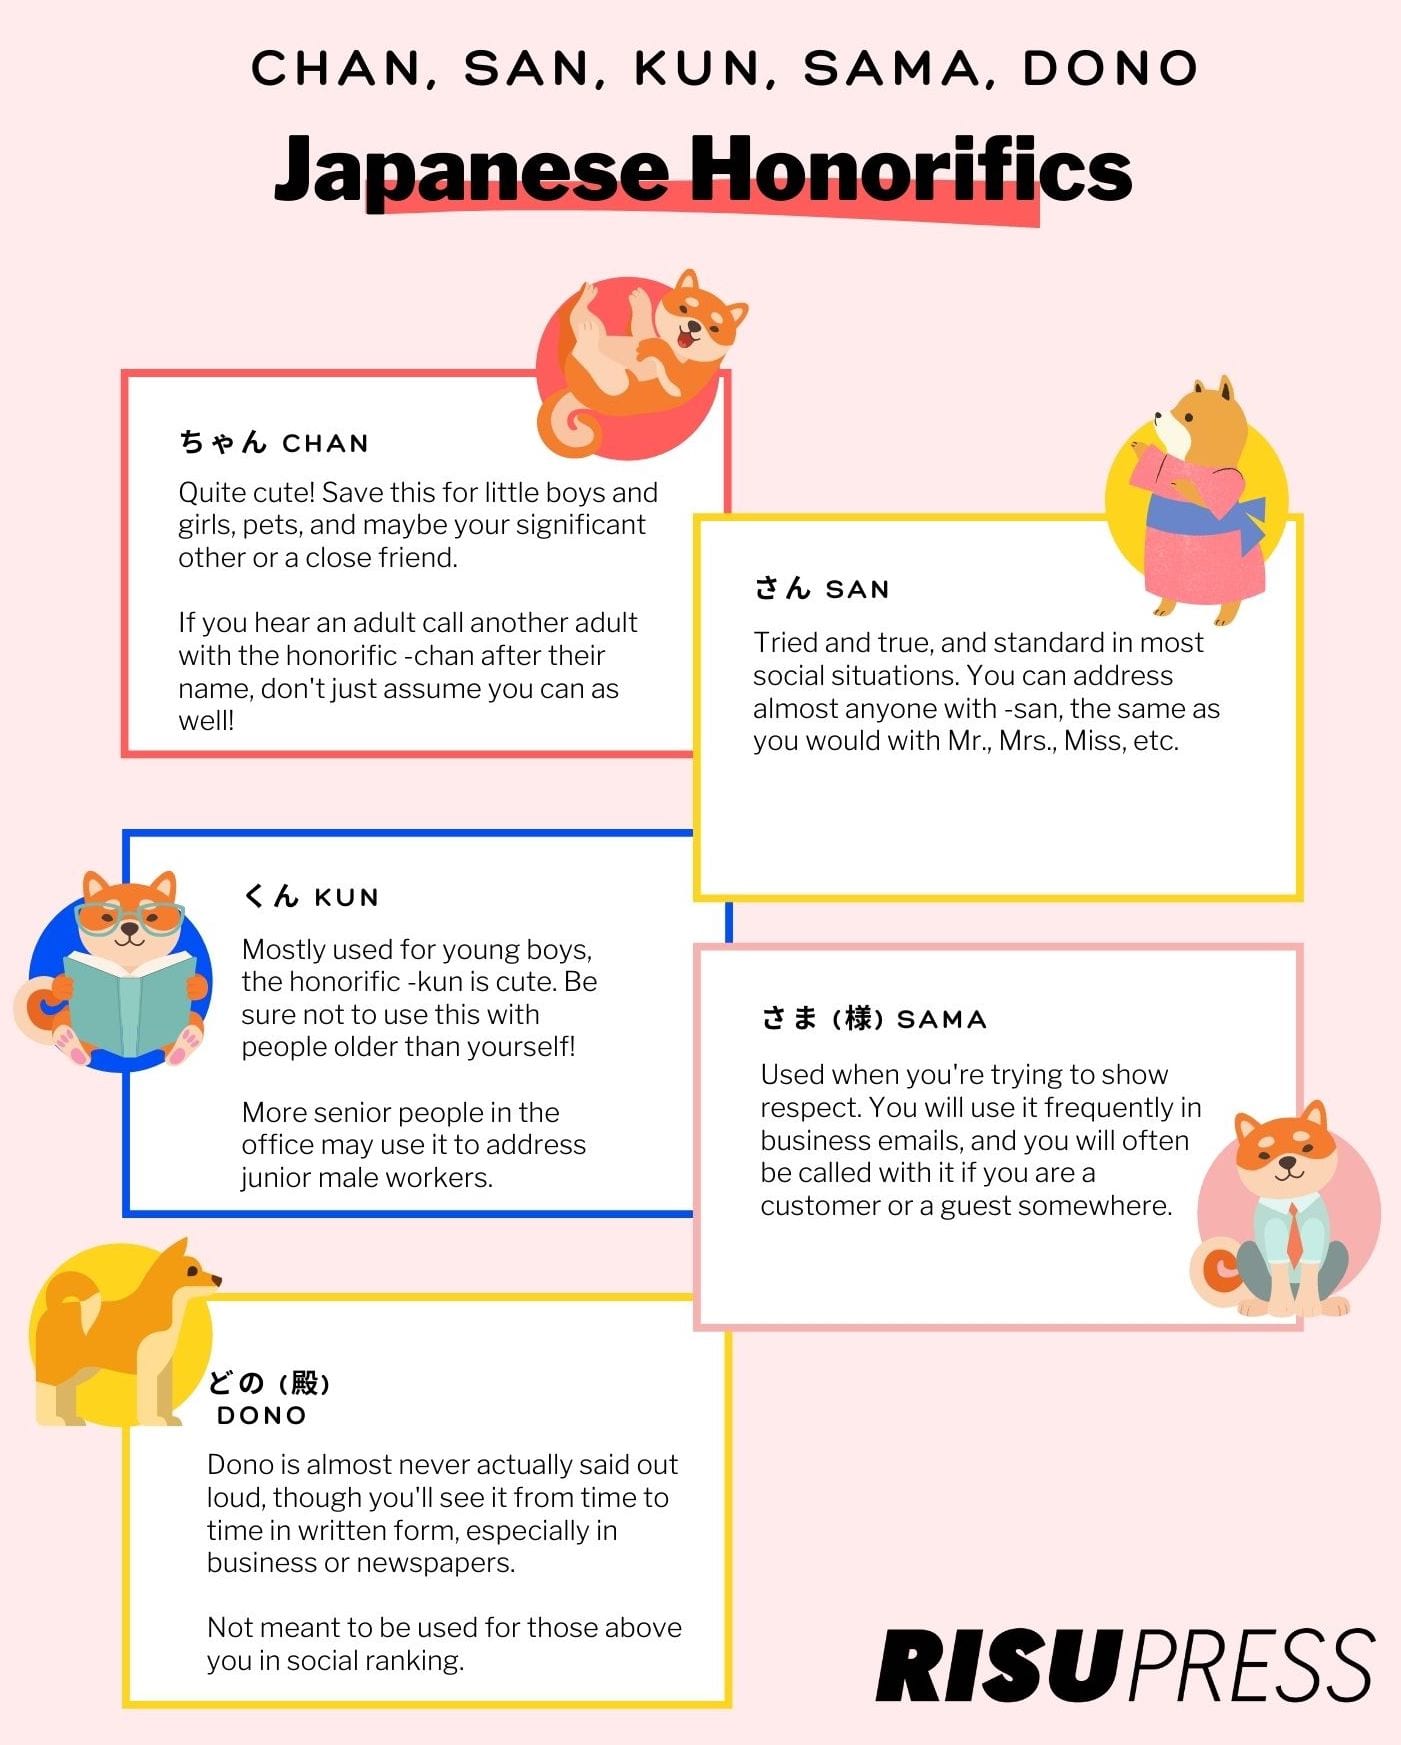 Japanese suffixes used as honorifics to define social standing